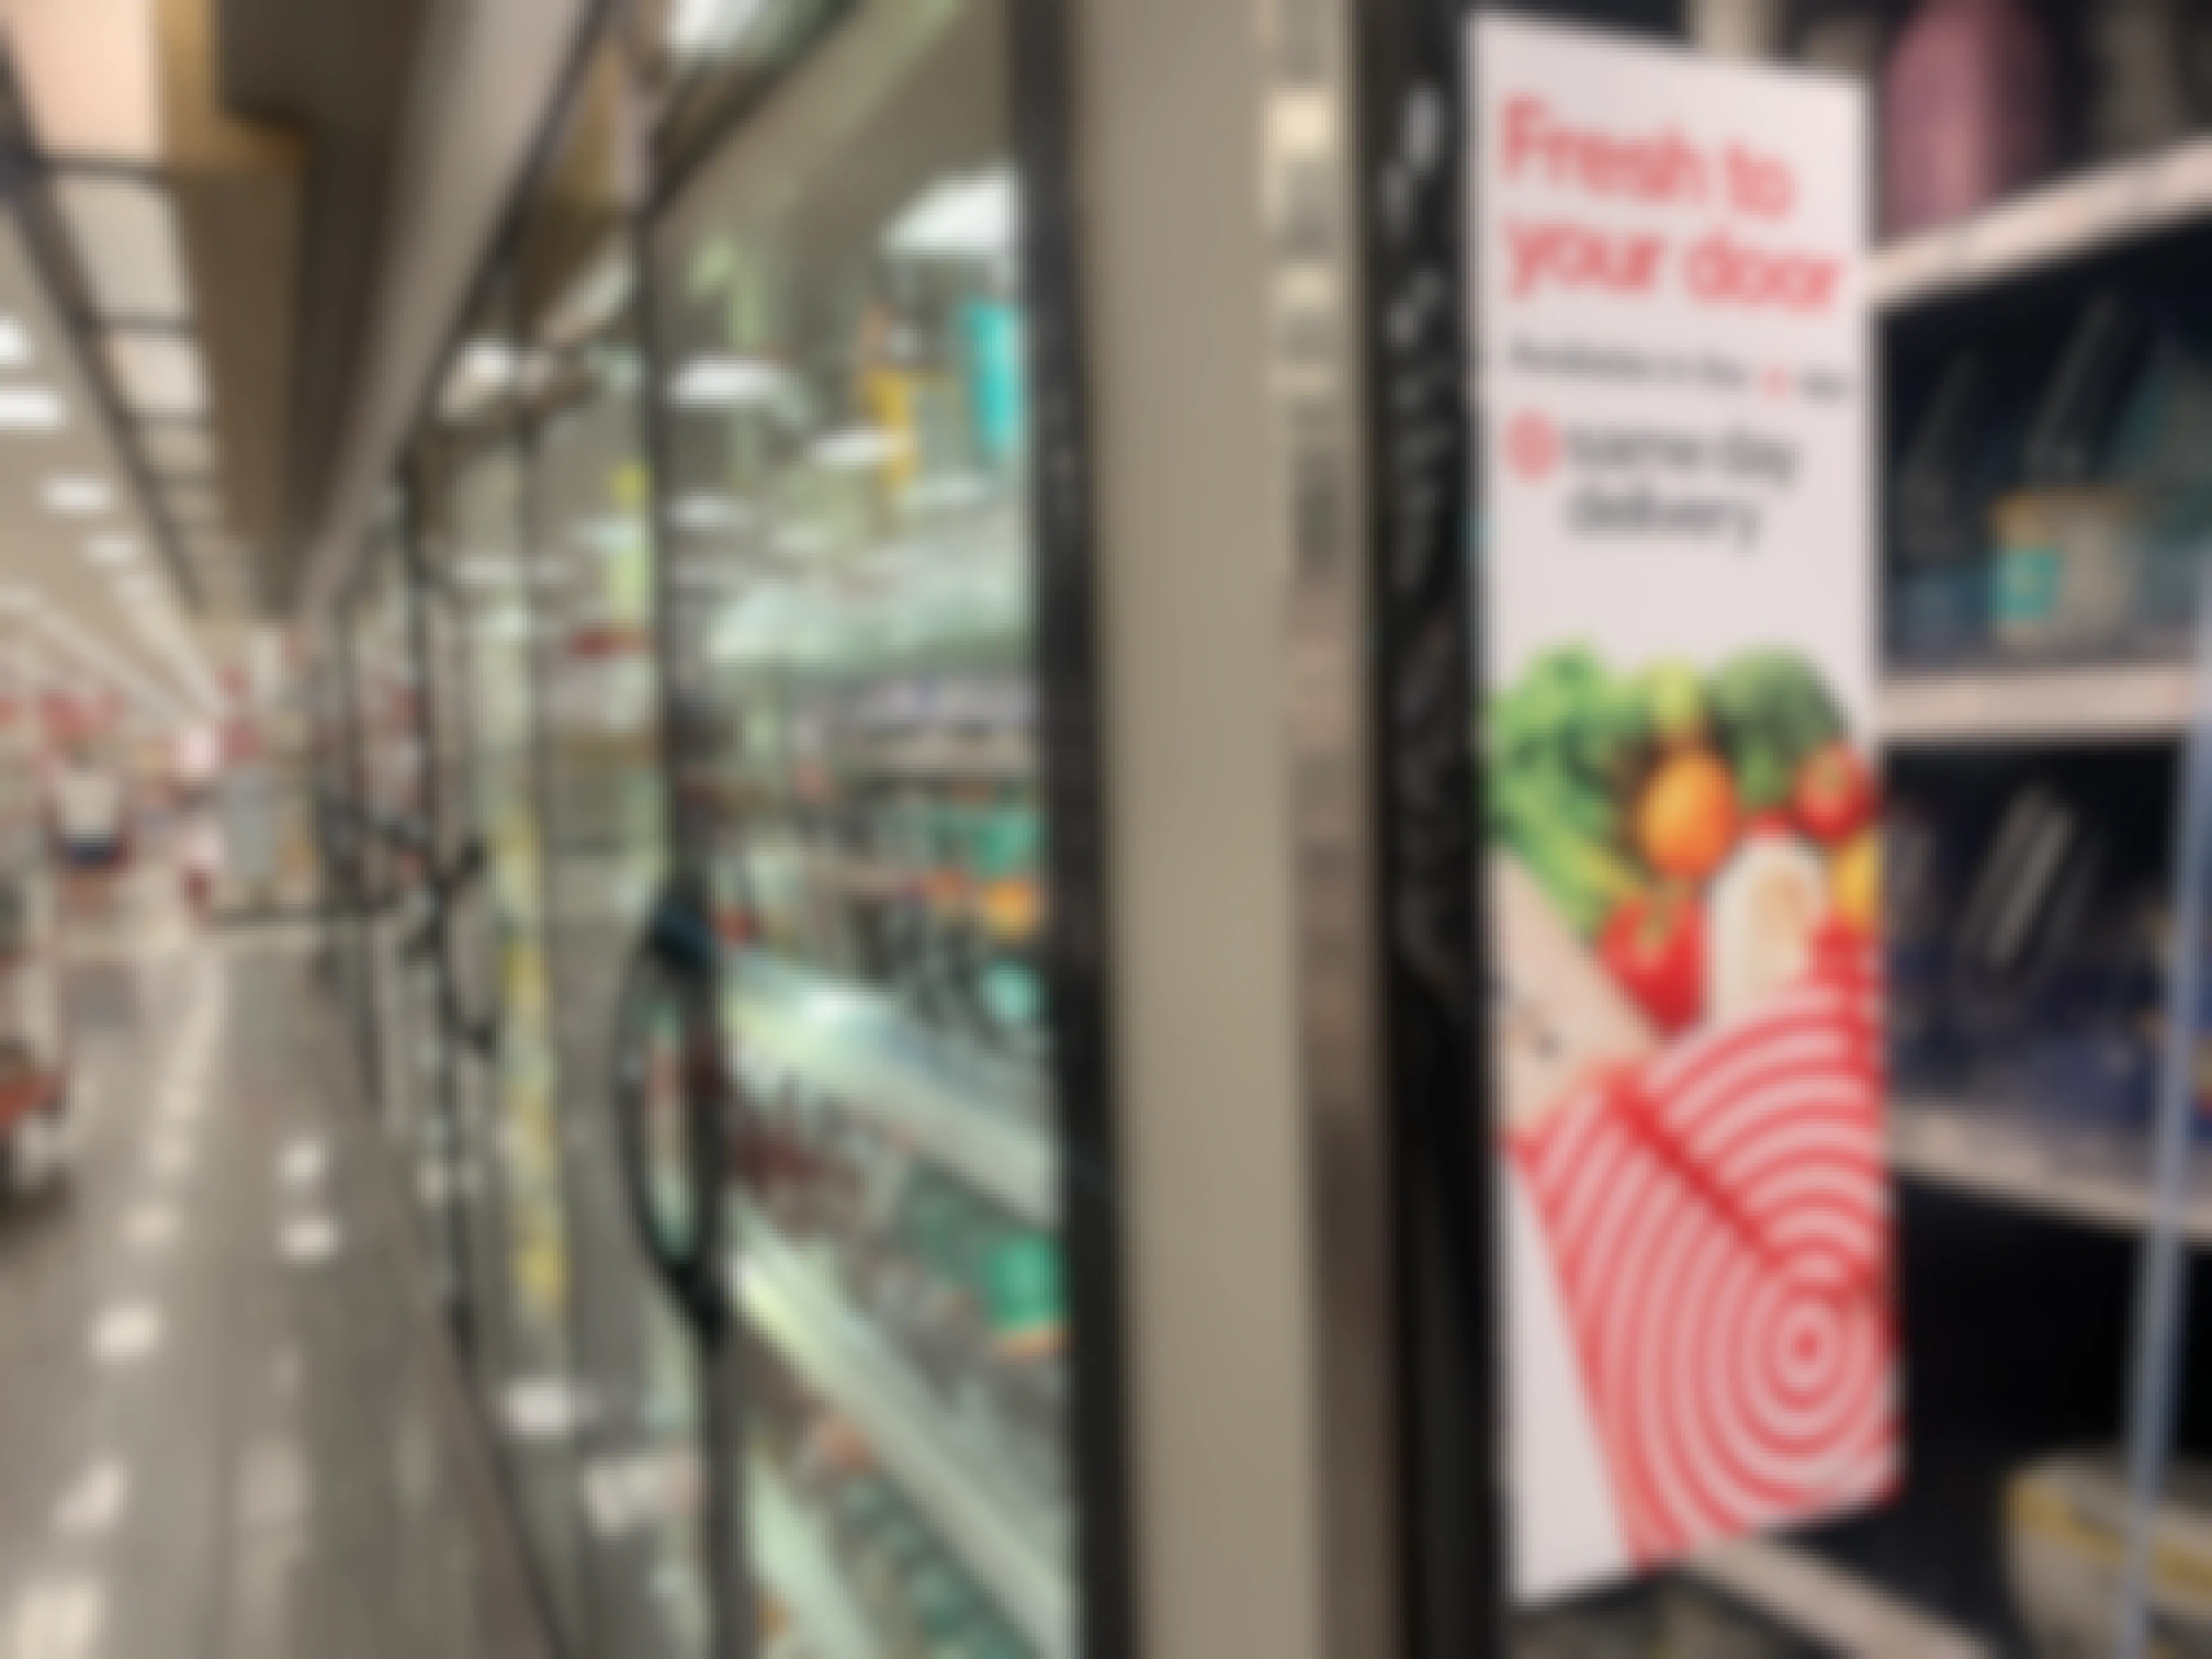 grocery isle of target with same day delivery sign